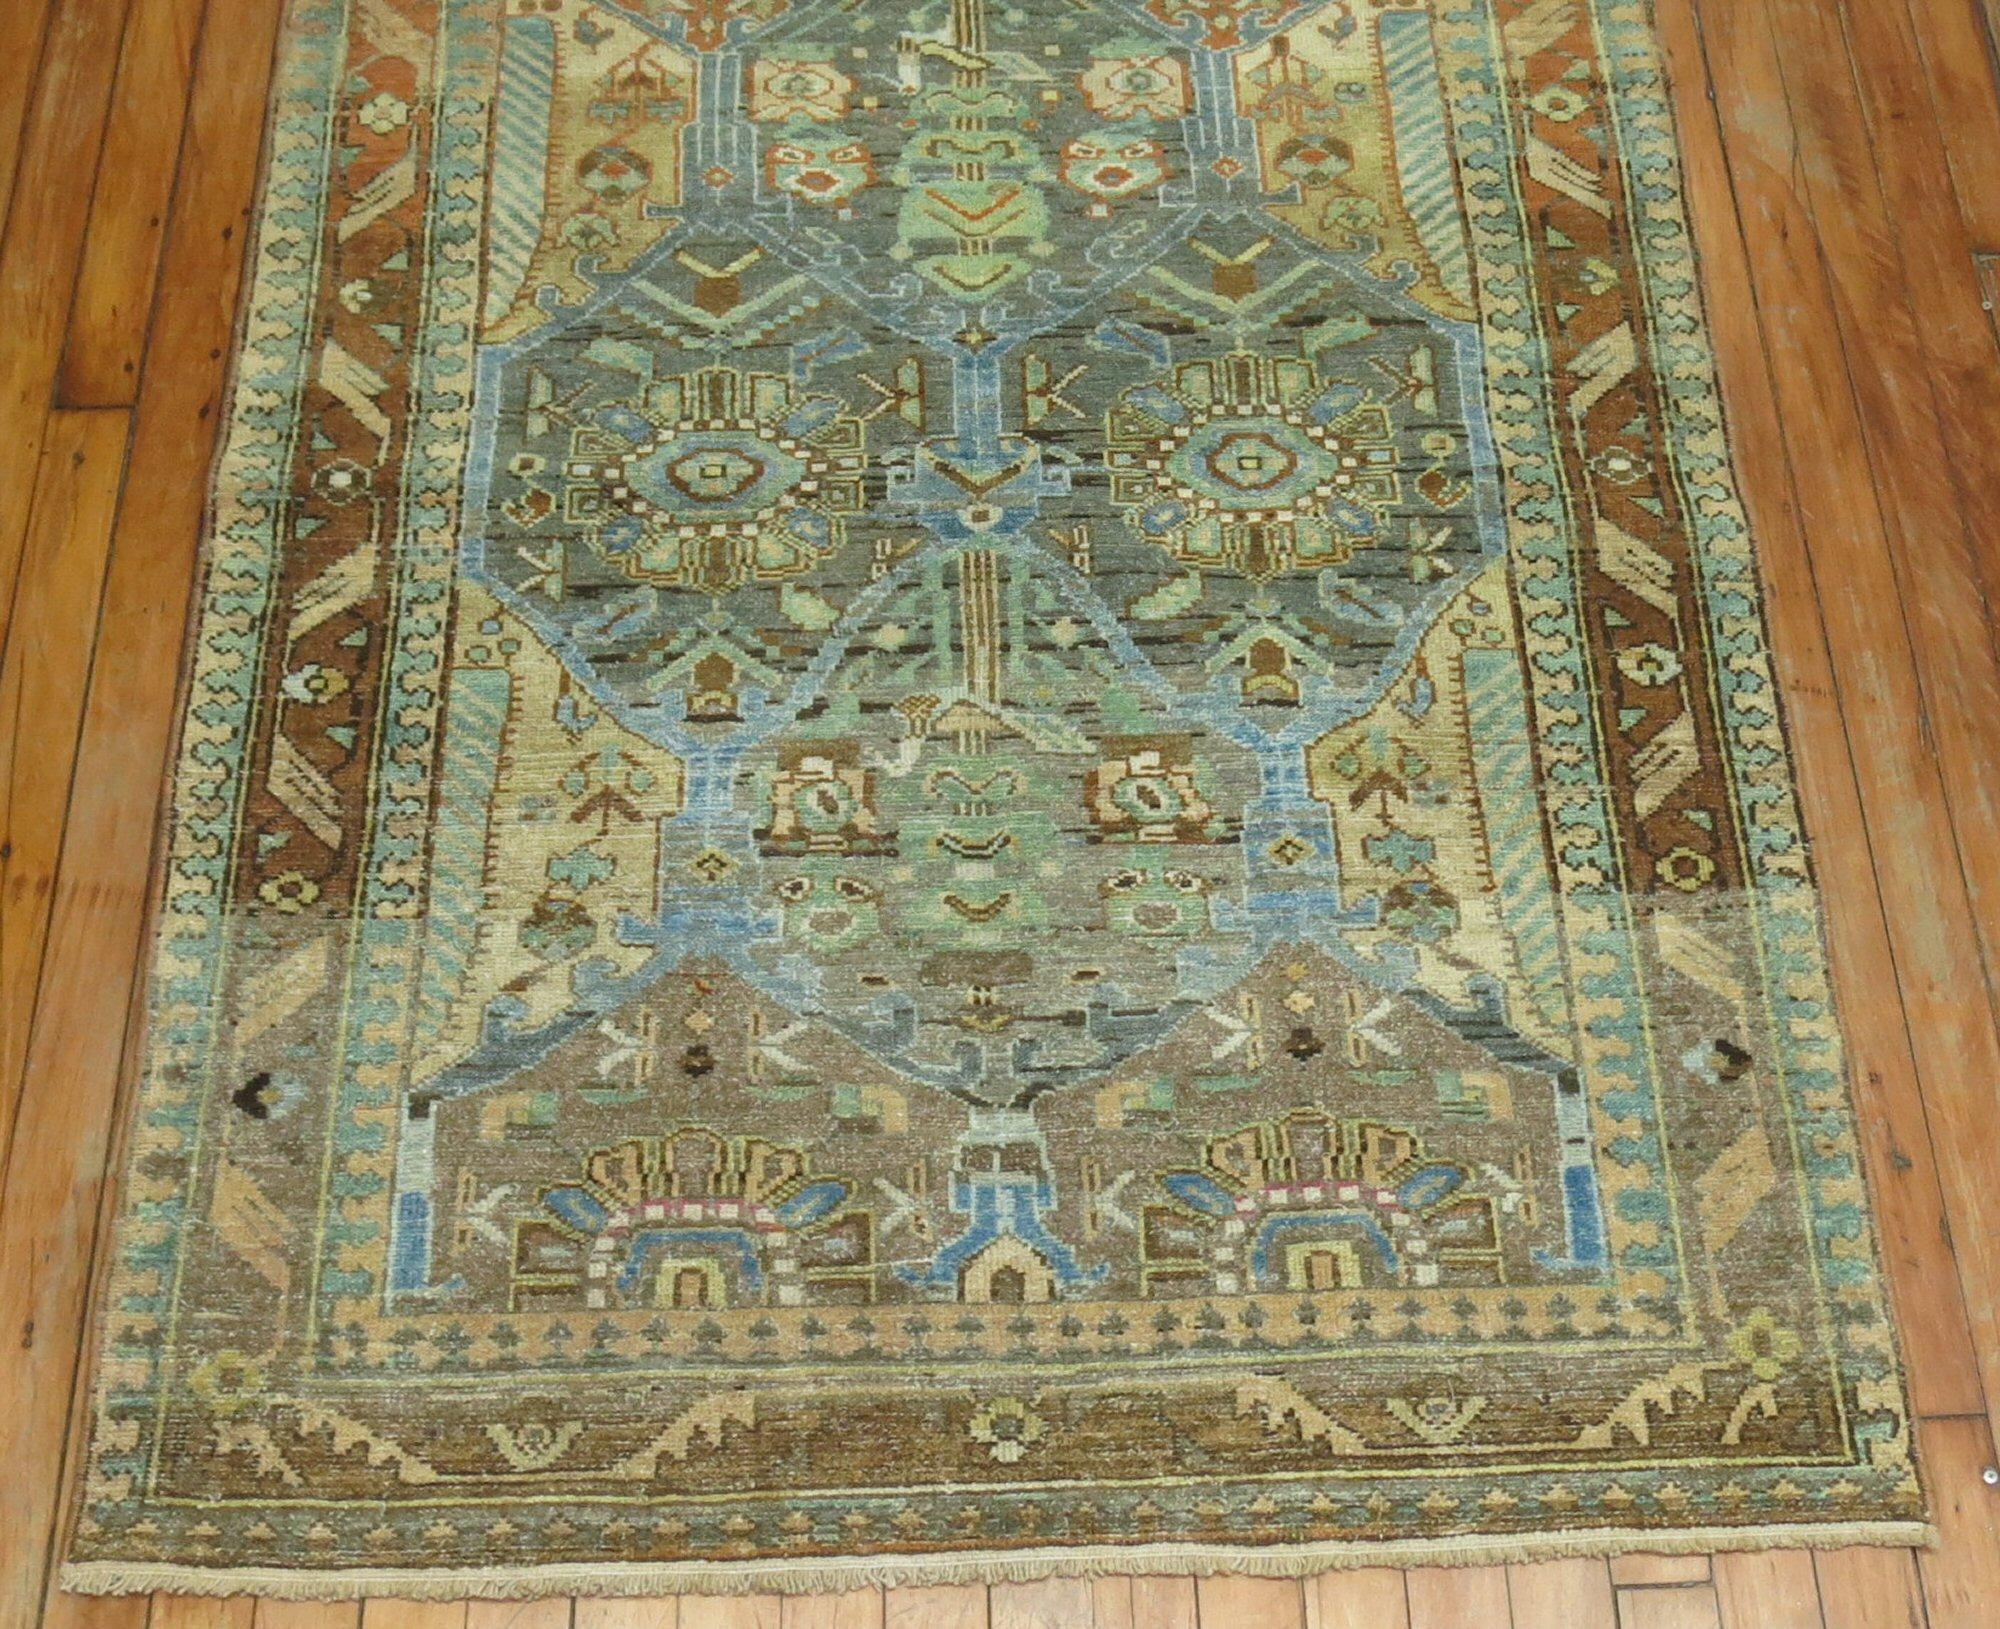 A throw size 20th century Persian Malayer rug with an all-over design in gray, light blue and green with a rusty orange border

Measures: 3'6” x 5'.